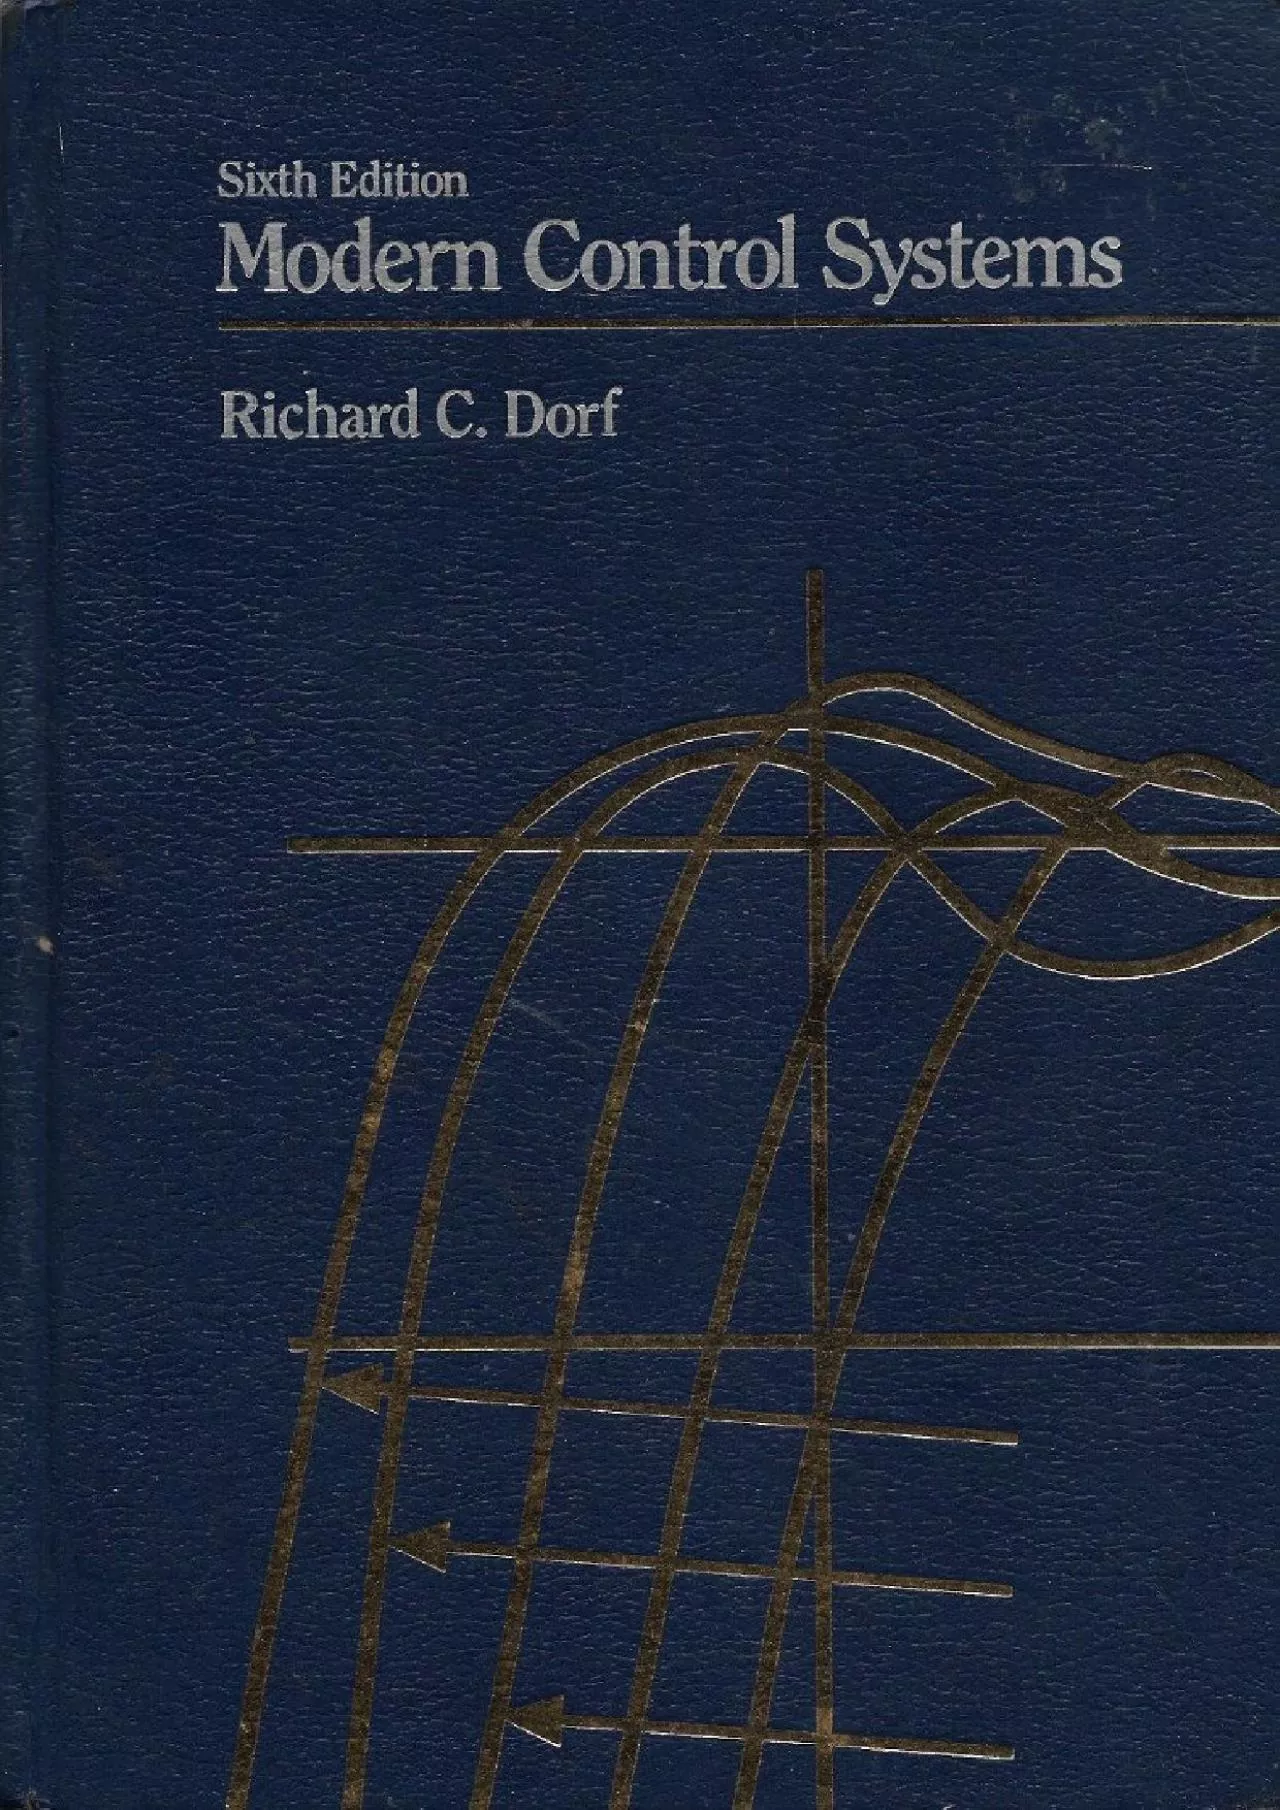 (BOOK)-Modern Control Systems